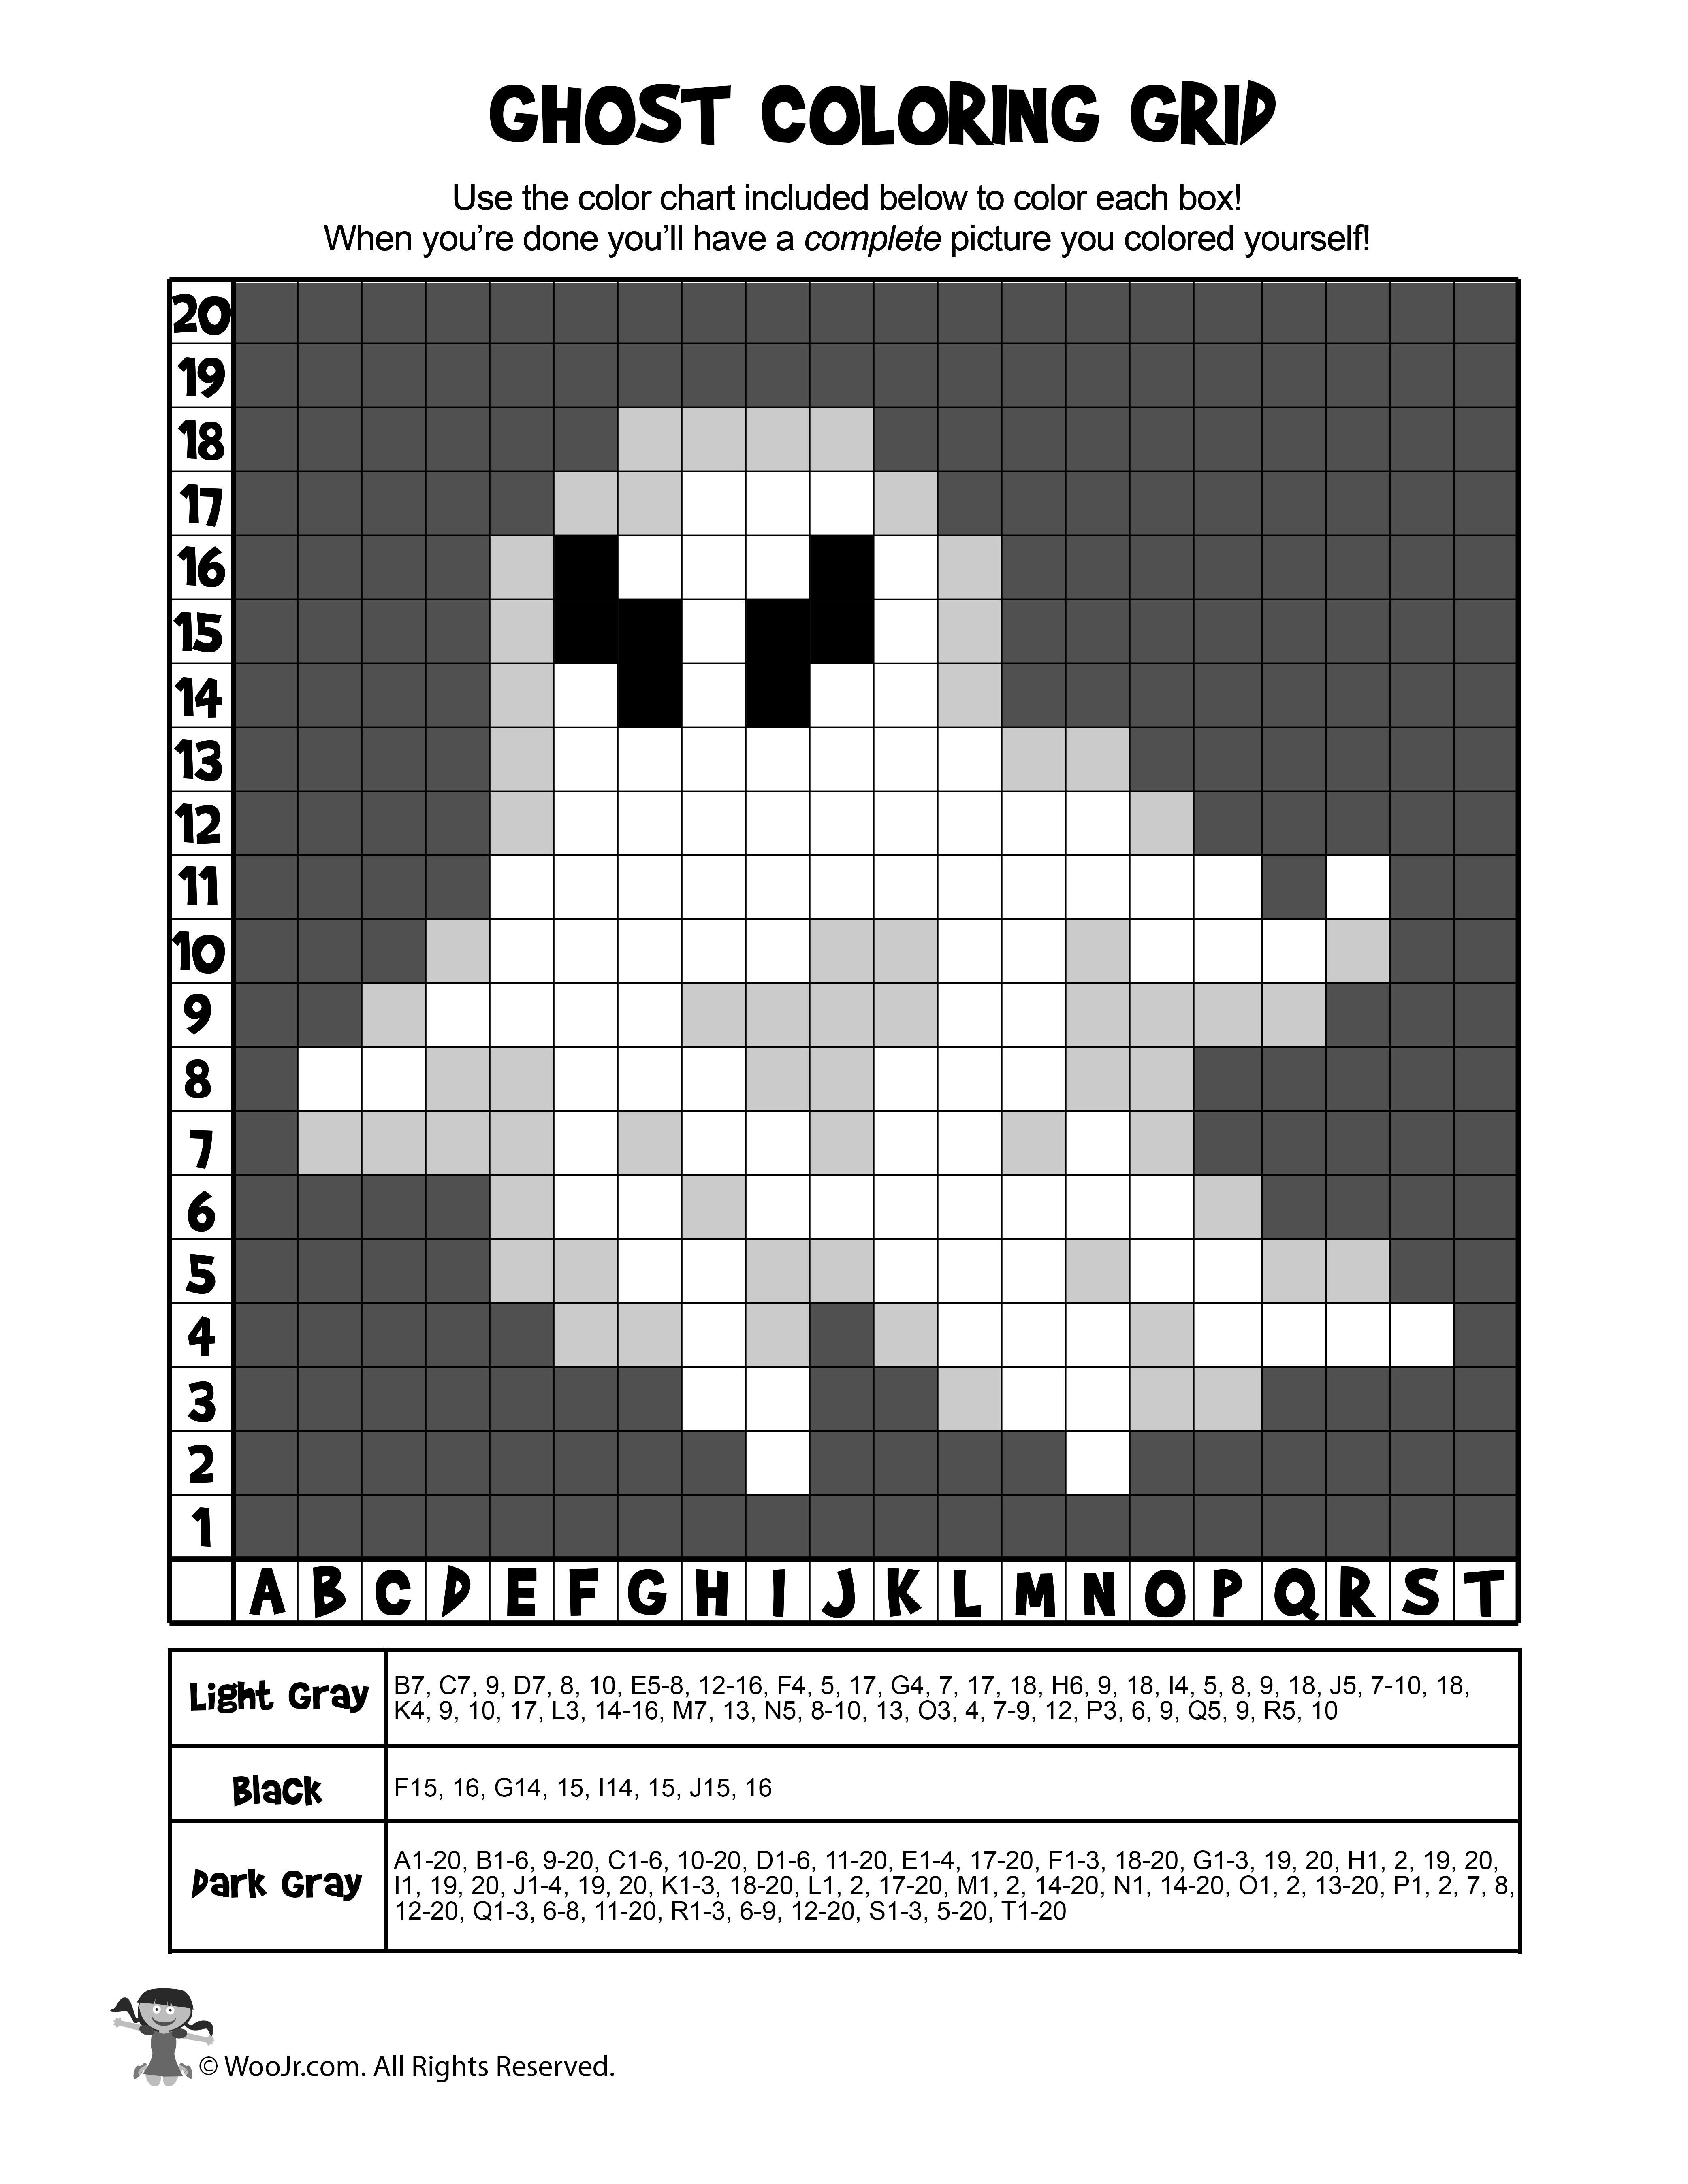 Ghost Halloween Coloring Mystery Grid - Answers | Woo! Jr